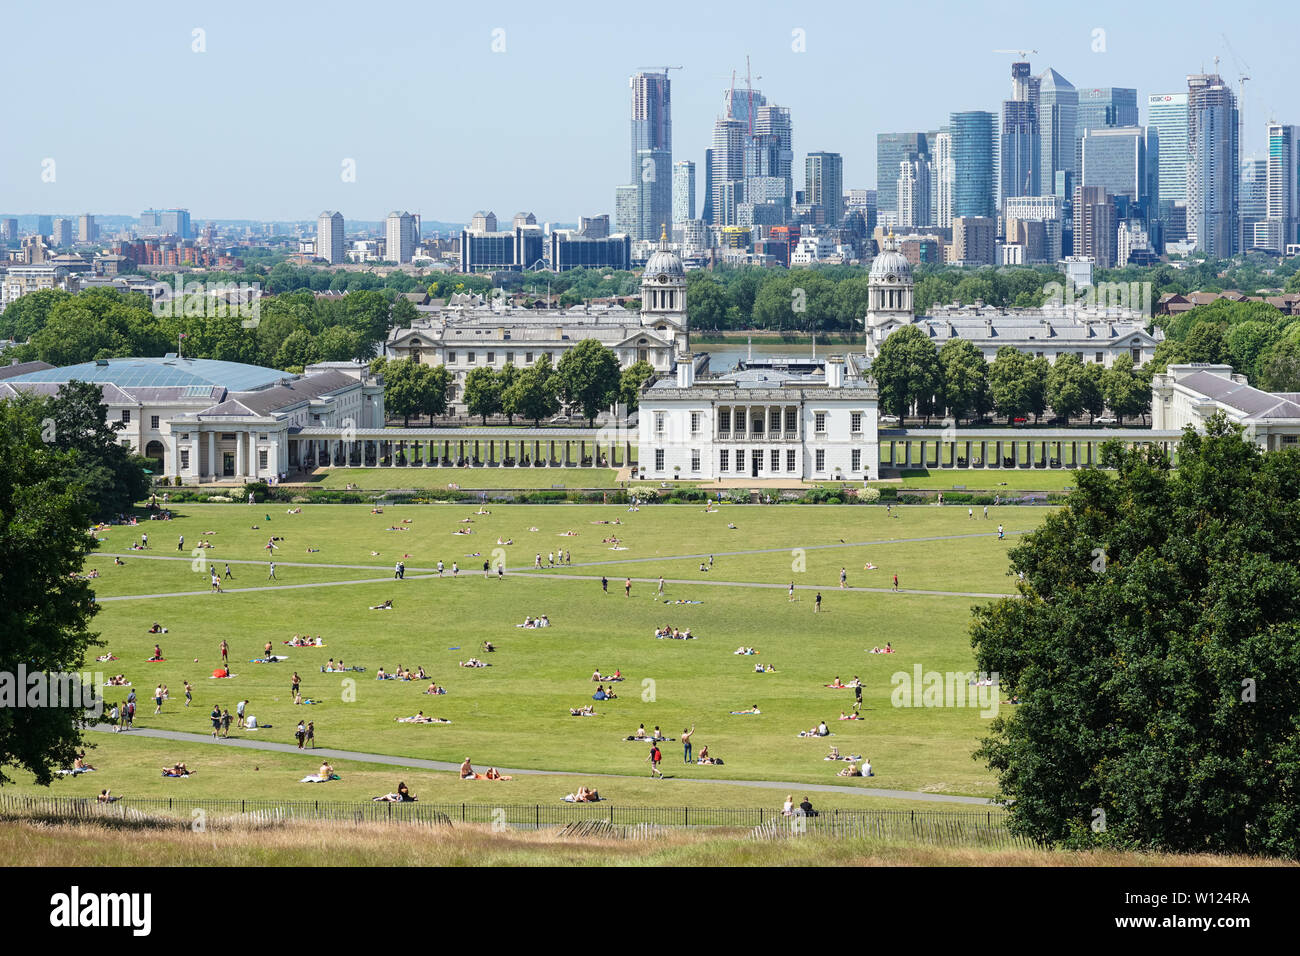 People enjoying hot and sunny day in Greenwich Park, London, England, United Kingdom, UK Stock Photo